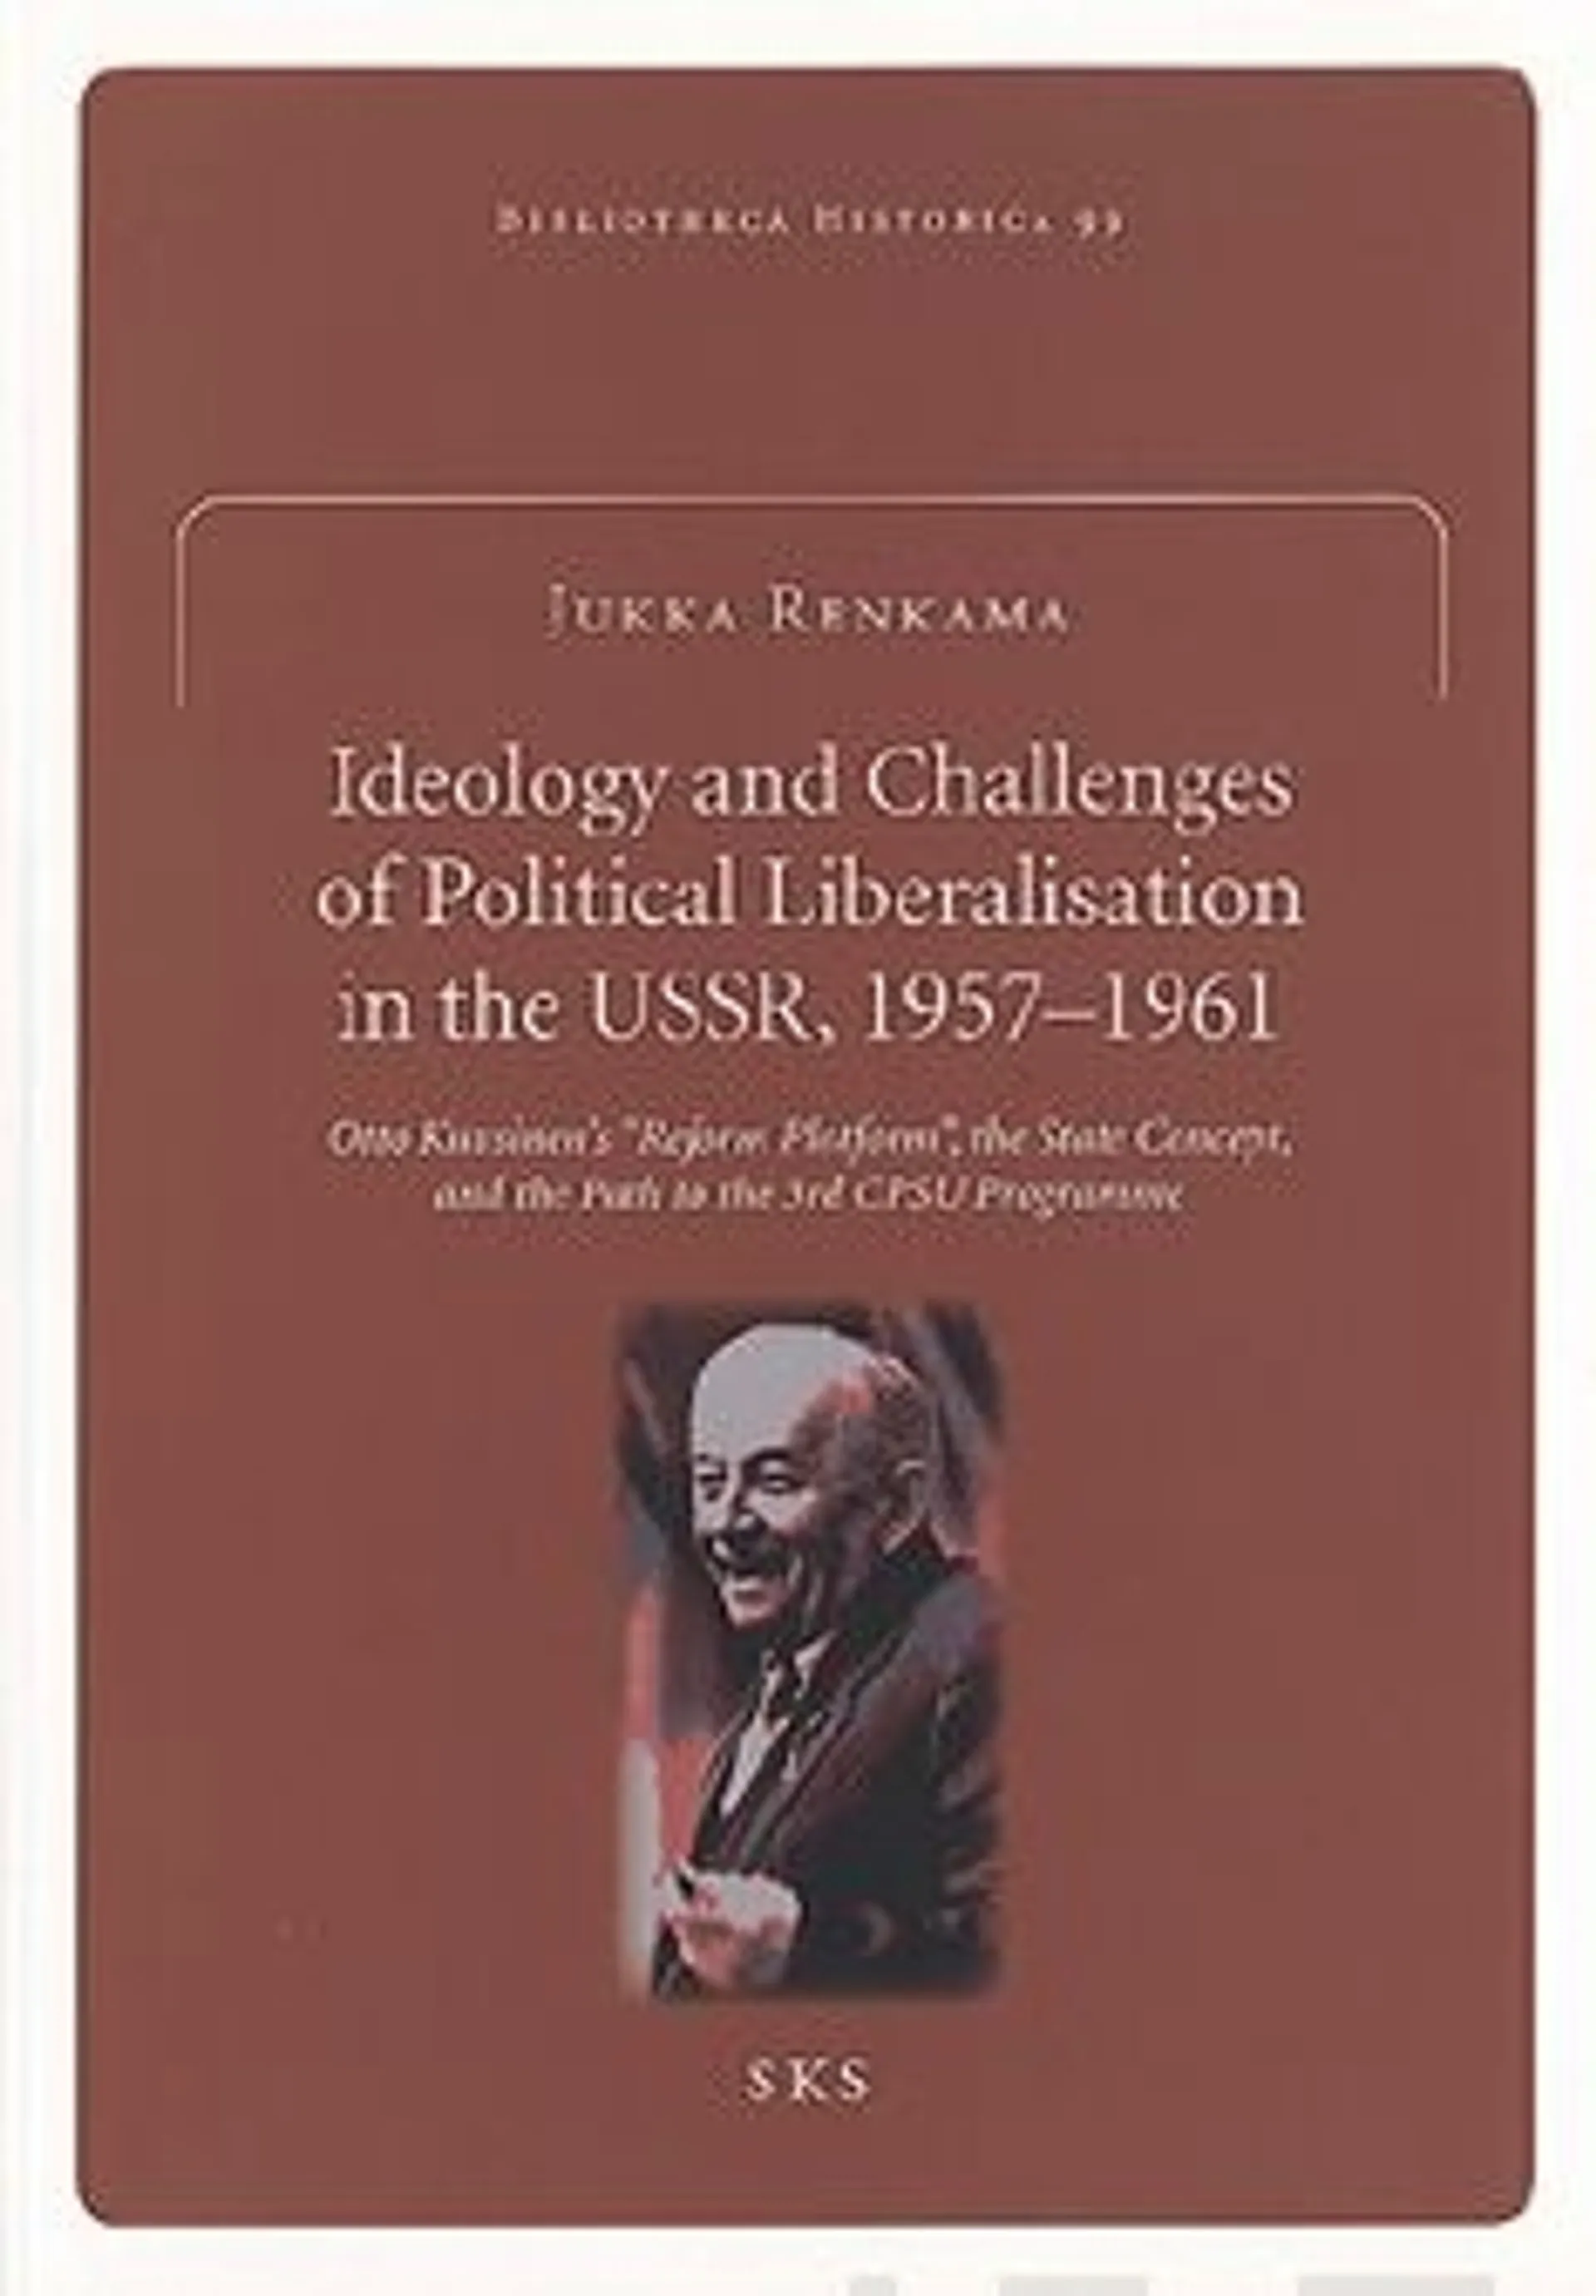 Renkama, Ideology and the challenges of political liberalisation in the USSR, 1957-1961